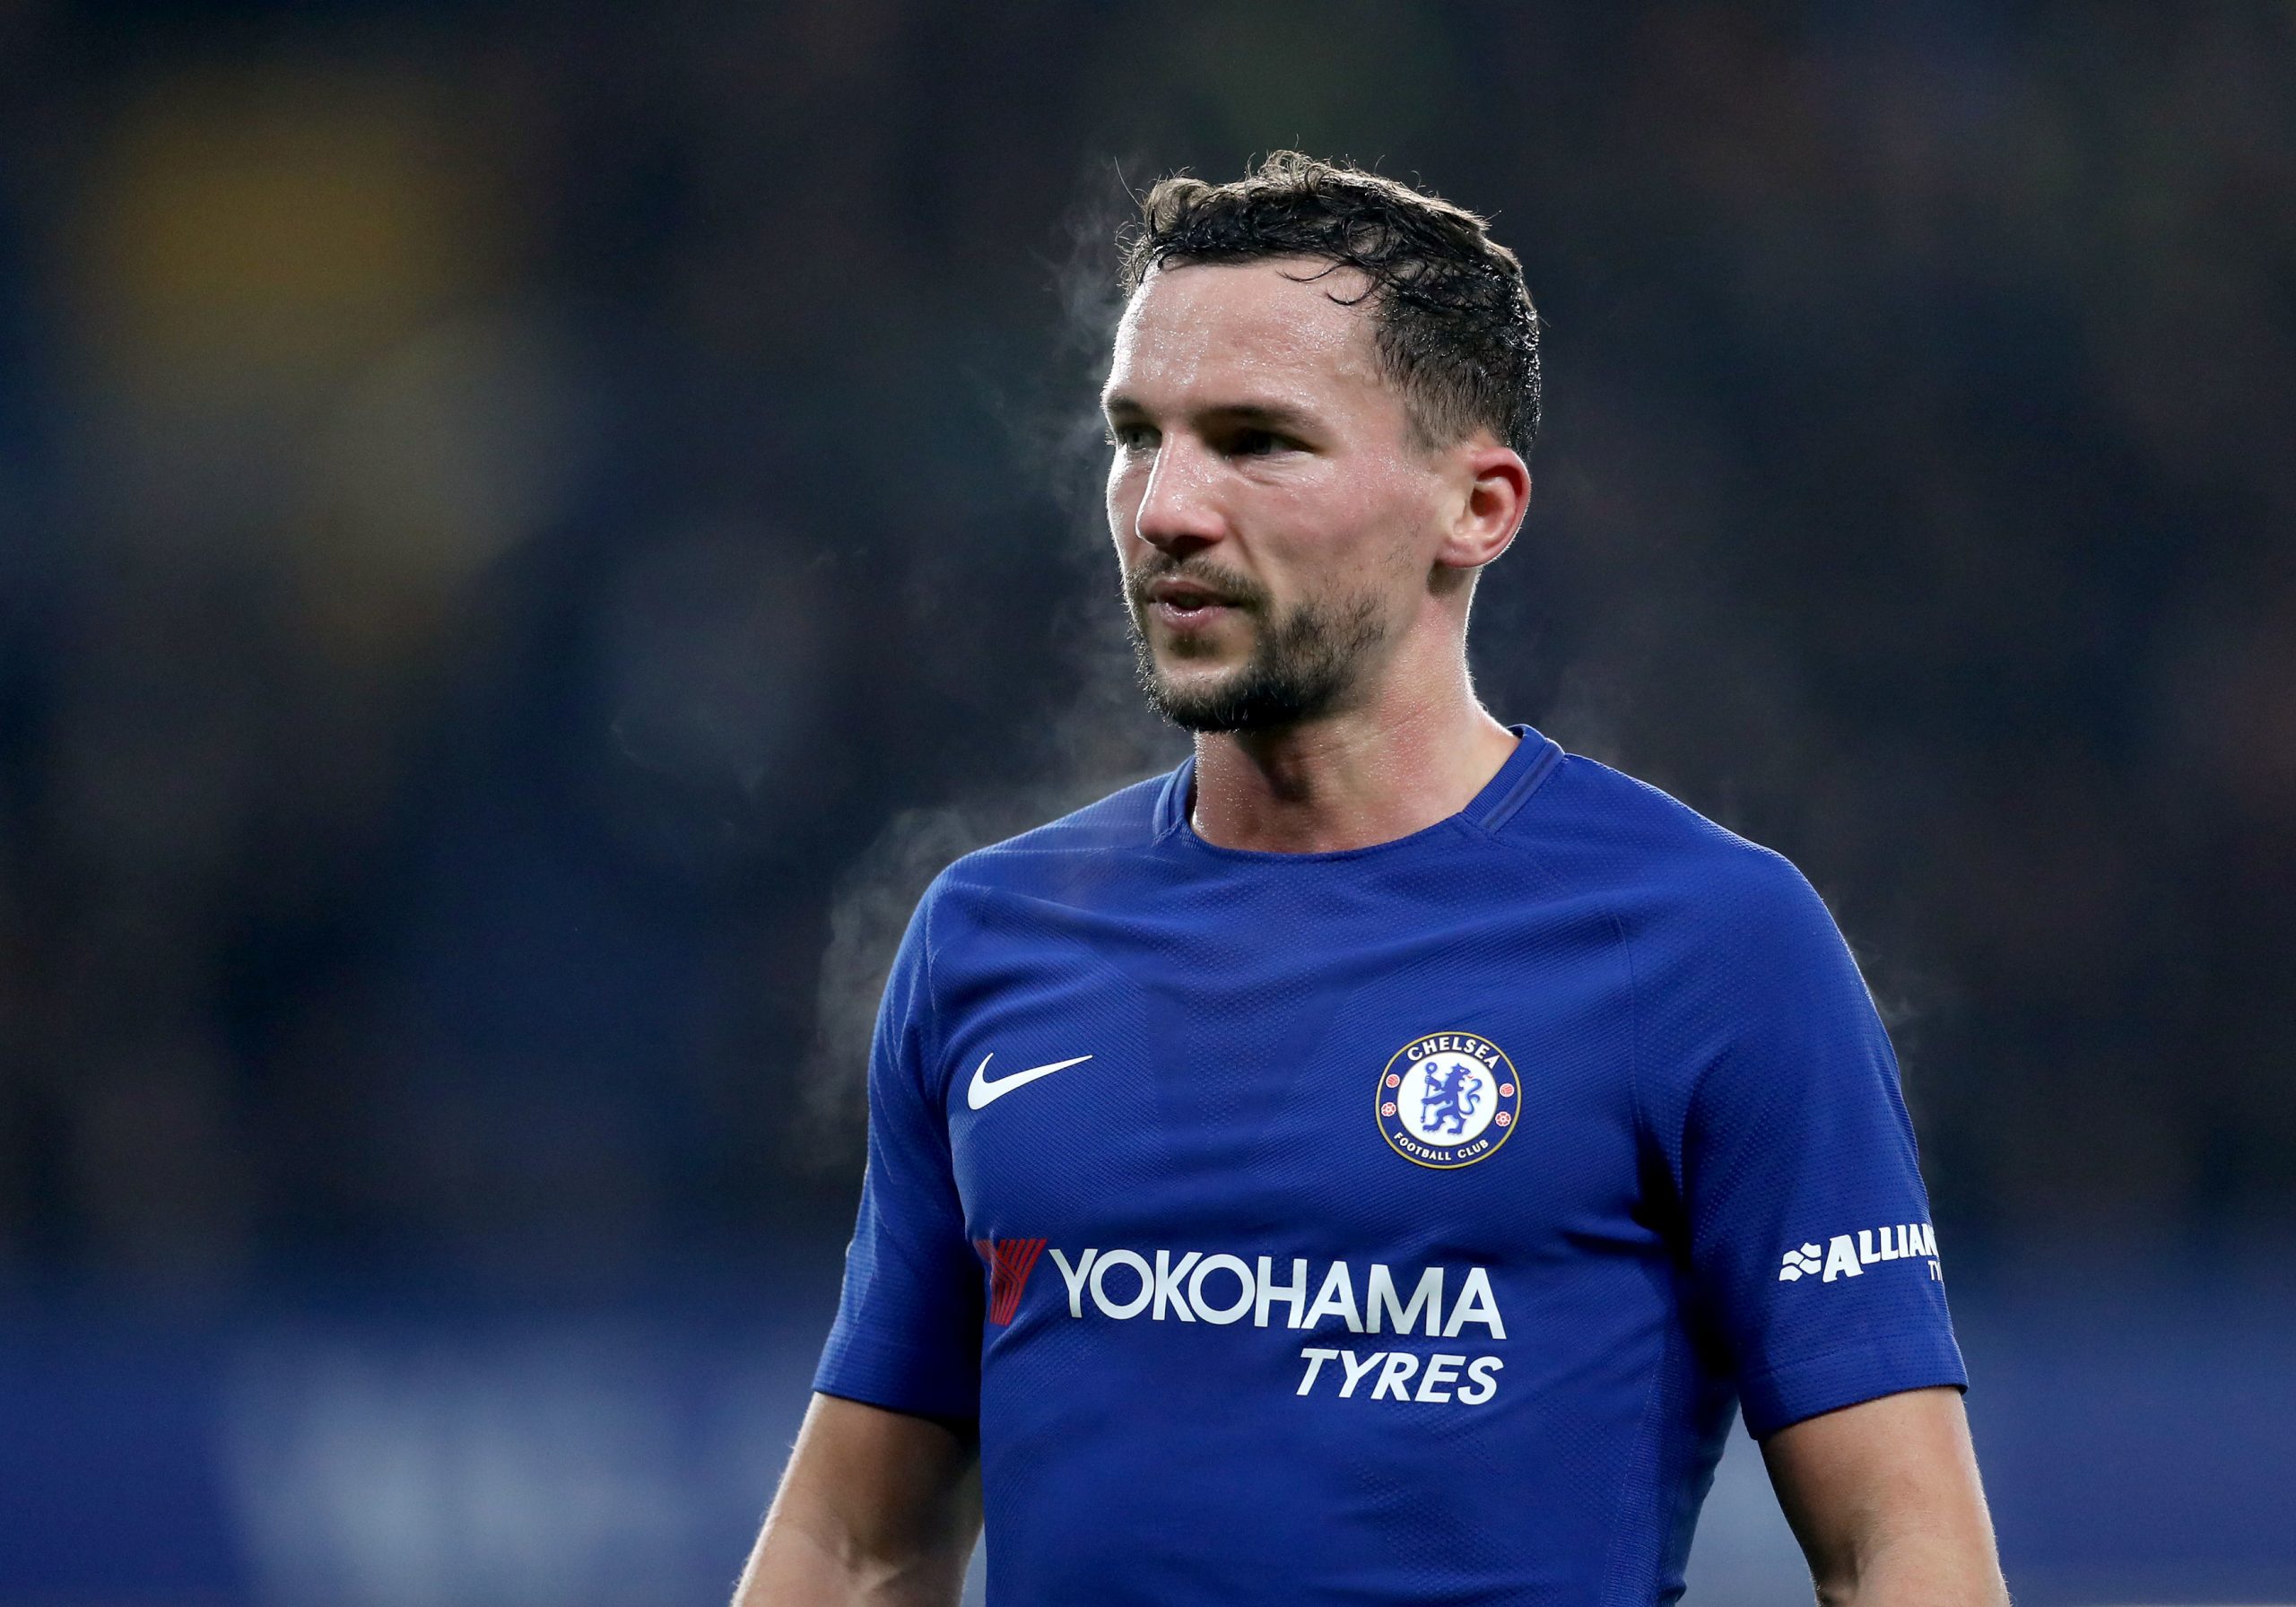 Premier League winner Danny Drinkwater RETIRES at 33 after ‘being in limbo too long’ following Chelsea release